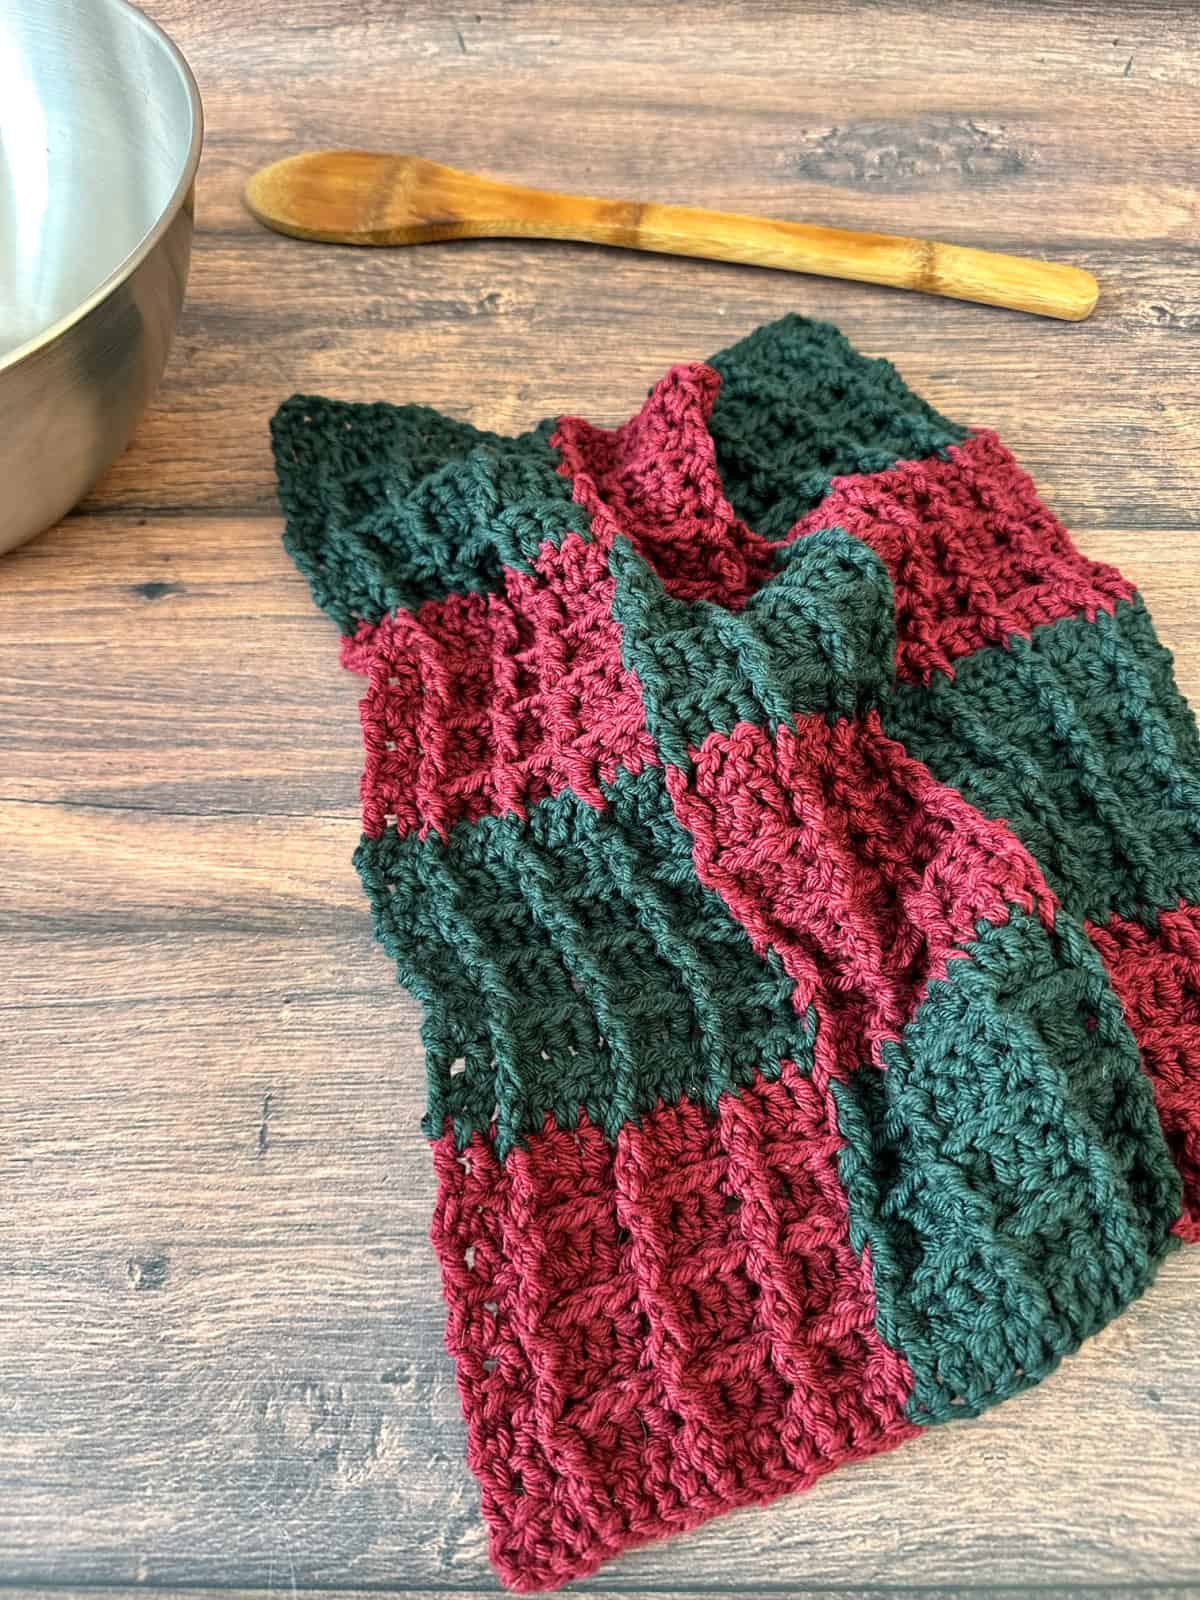 Crochet dishcloth in red and green plaid next to bowl and spoon.